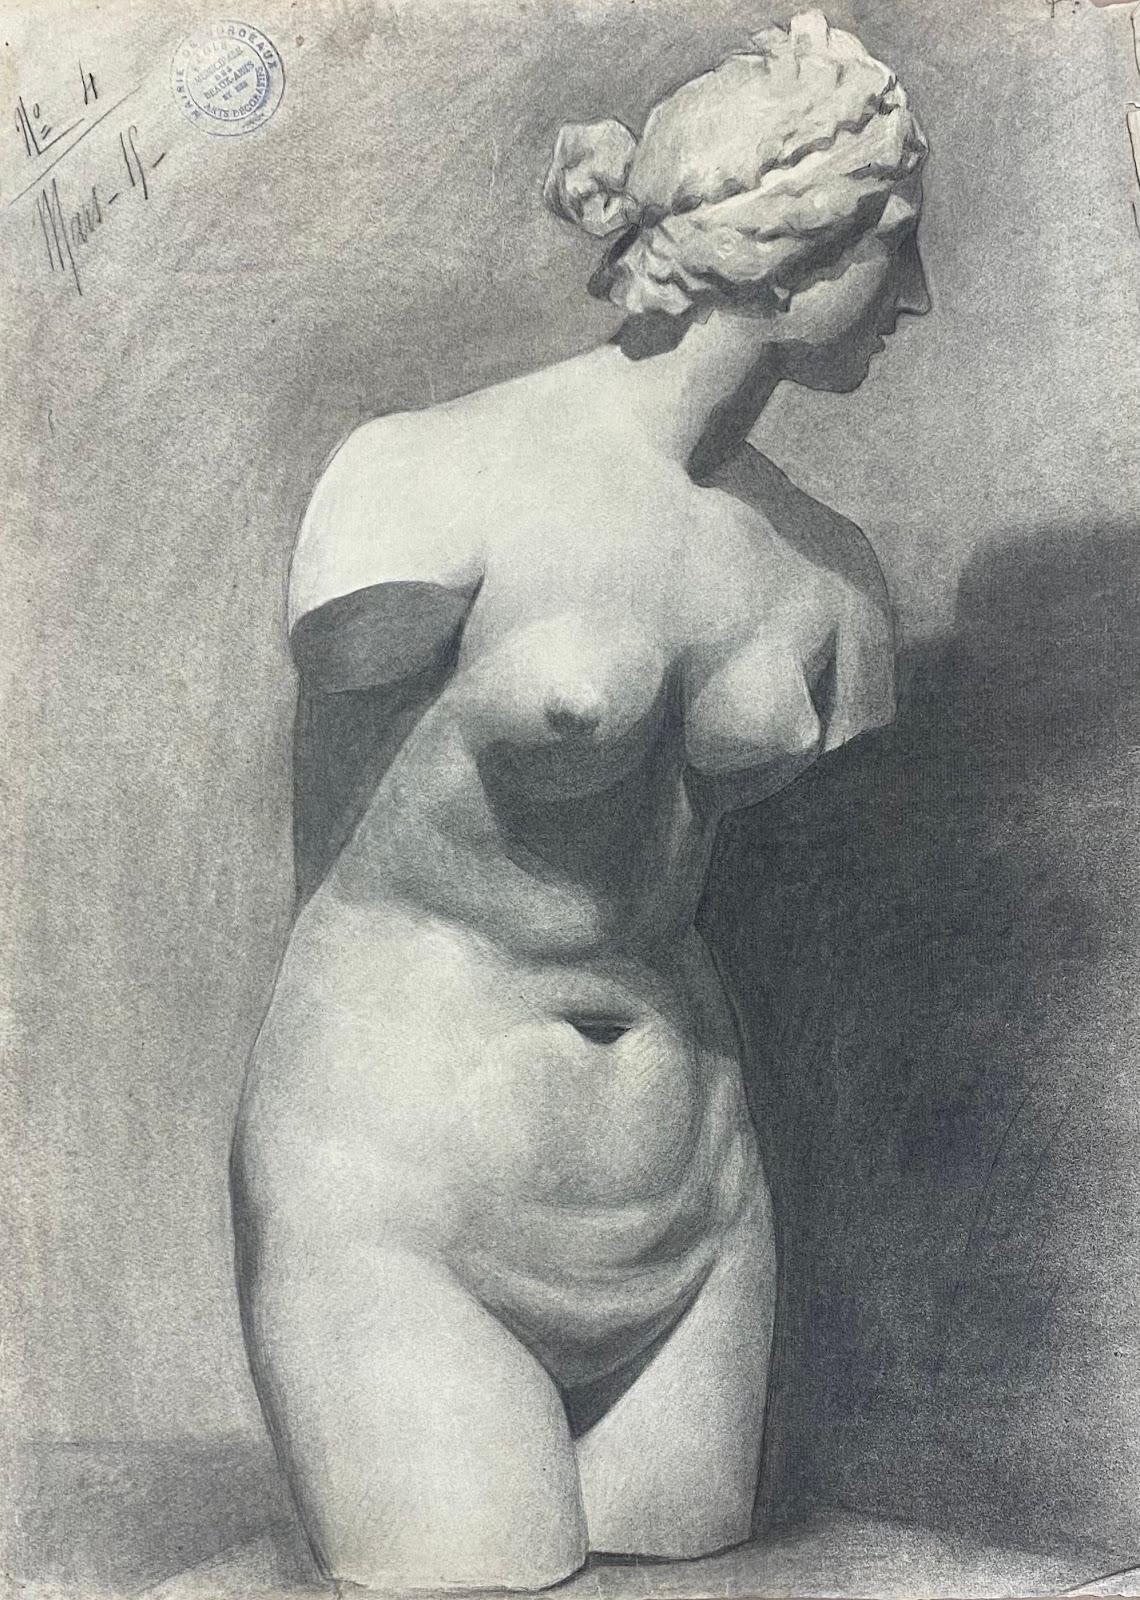 Life study drawing
original atelier drawing
by the French artist, Jeanne Nachat (1898-1984)
Nachat attended the prestigious Académie des Beaux-Arts in Paris and some of the drawings in this collection carry their official stamp. Some of France's